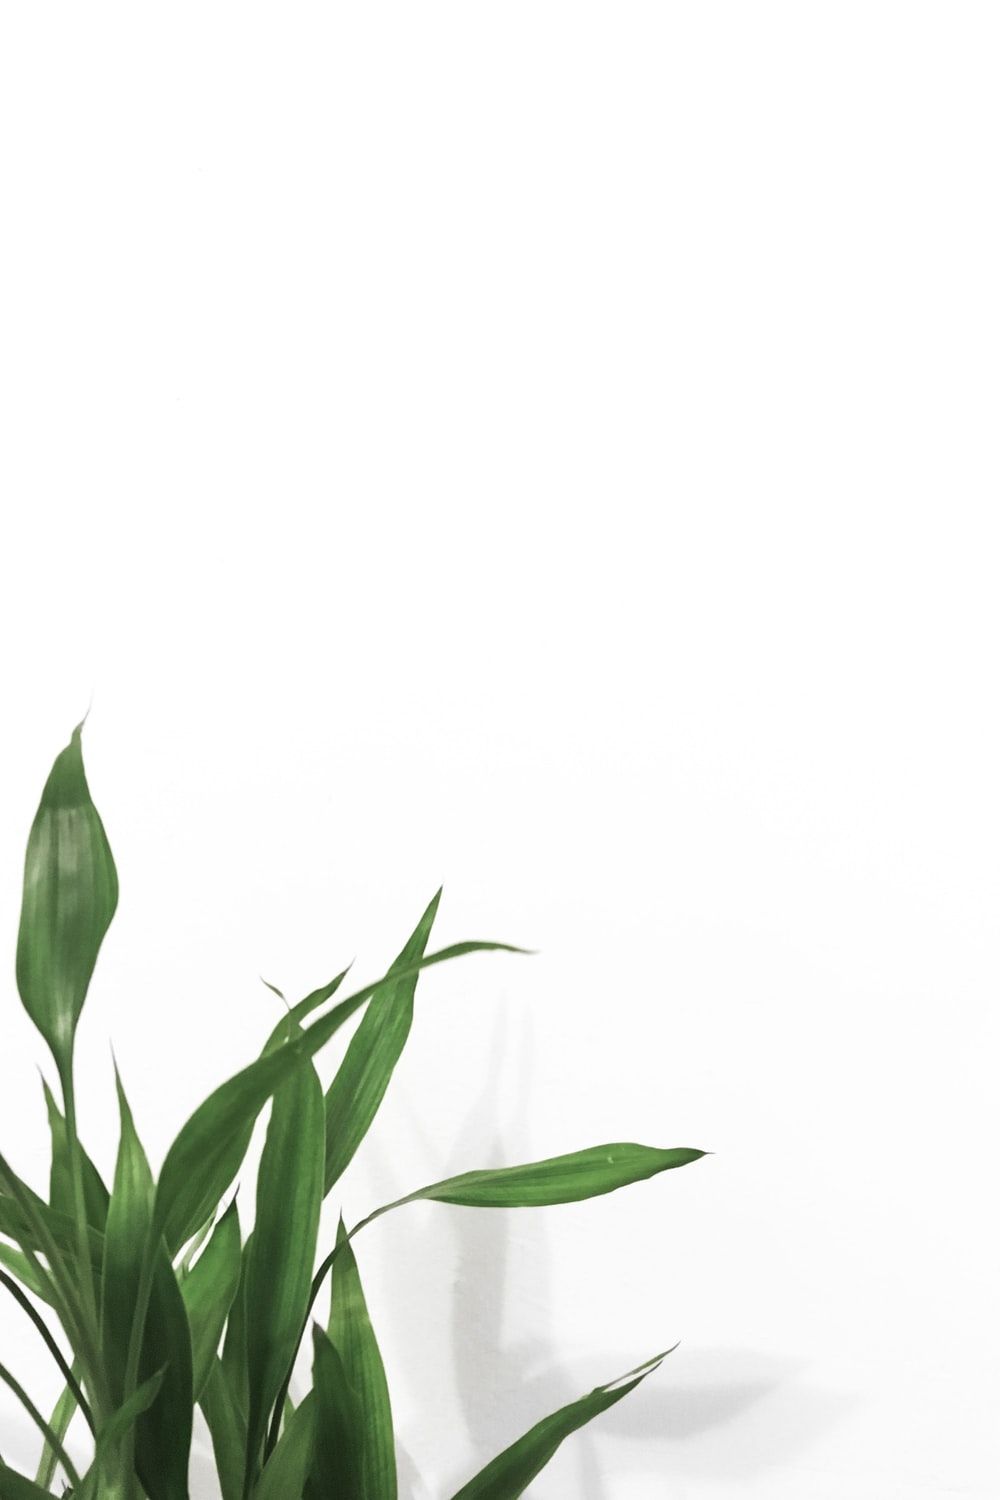 Plants with White Background best free background, white, plant and green photo